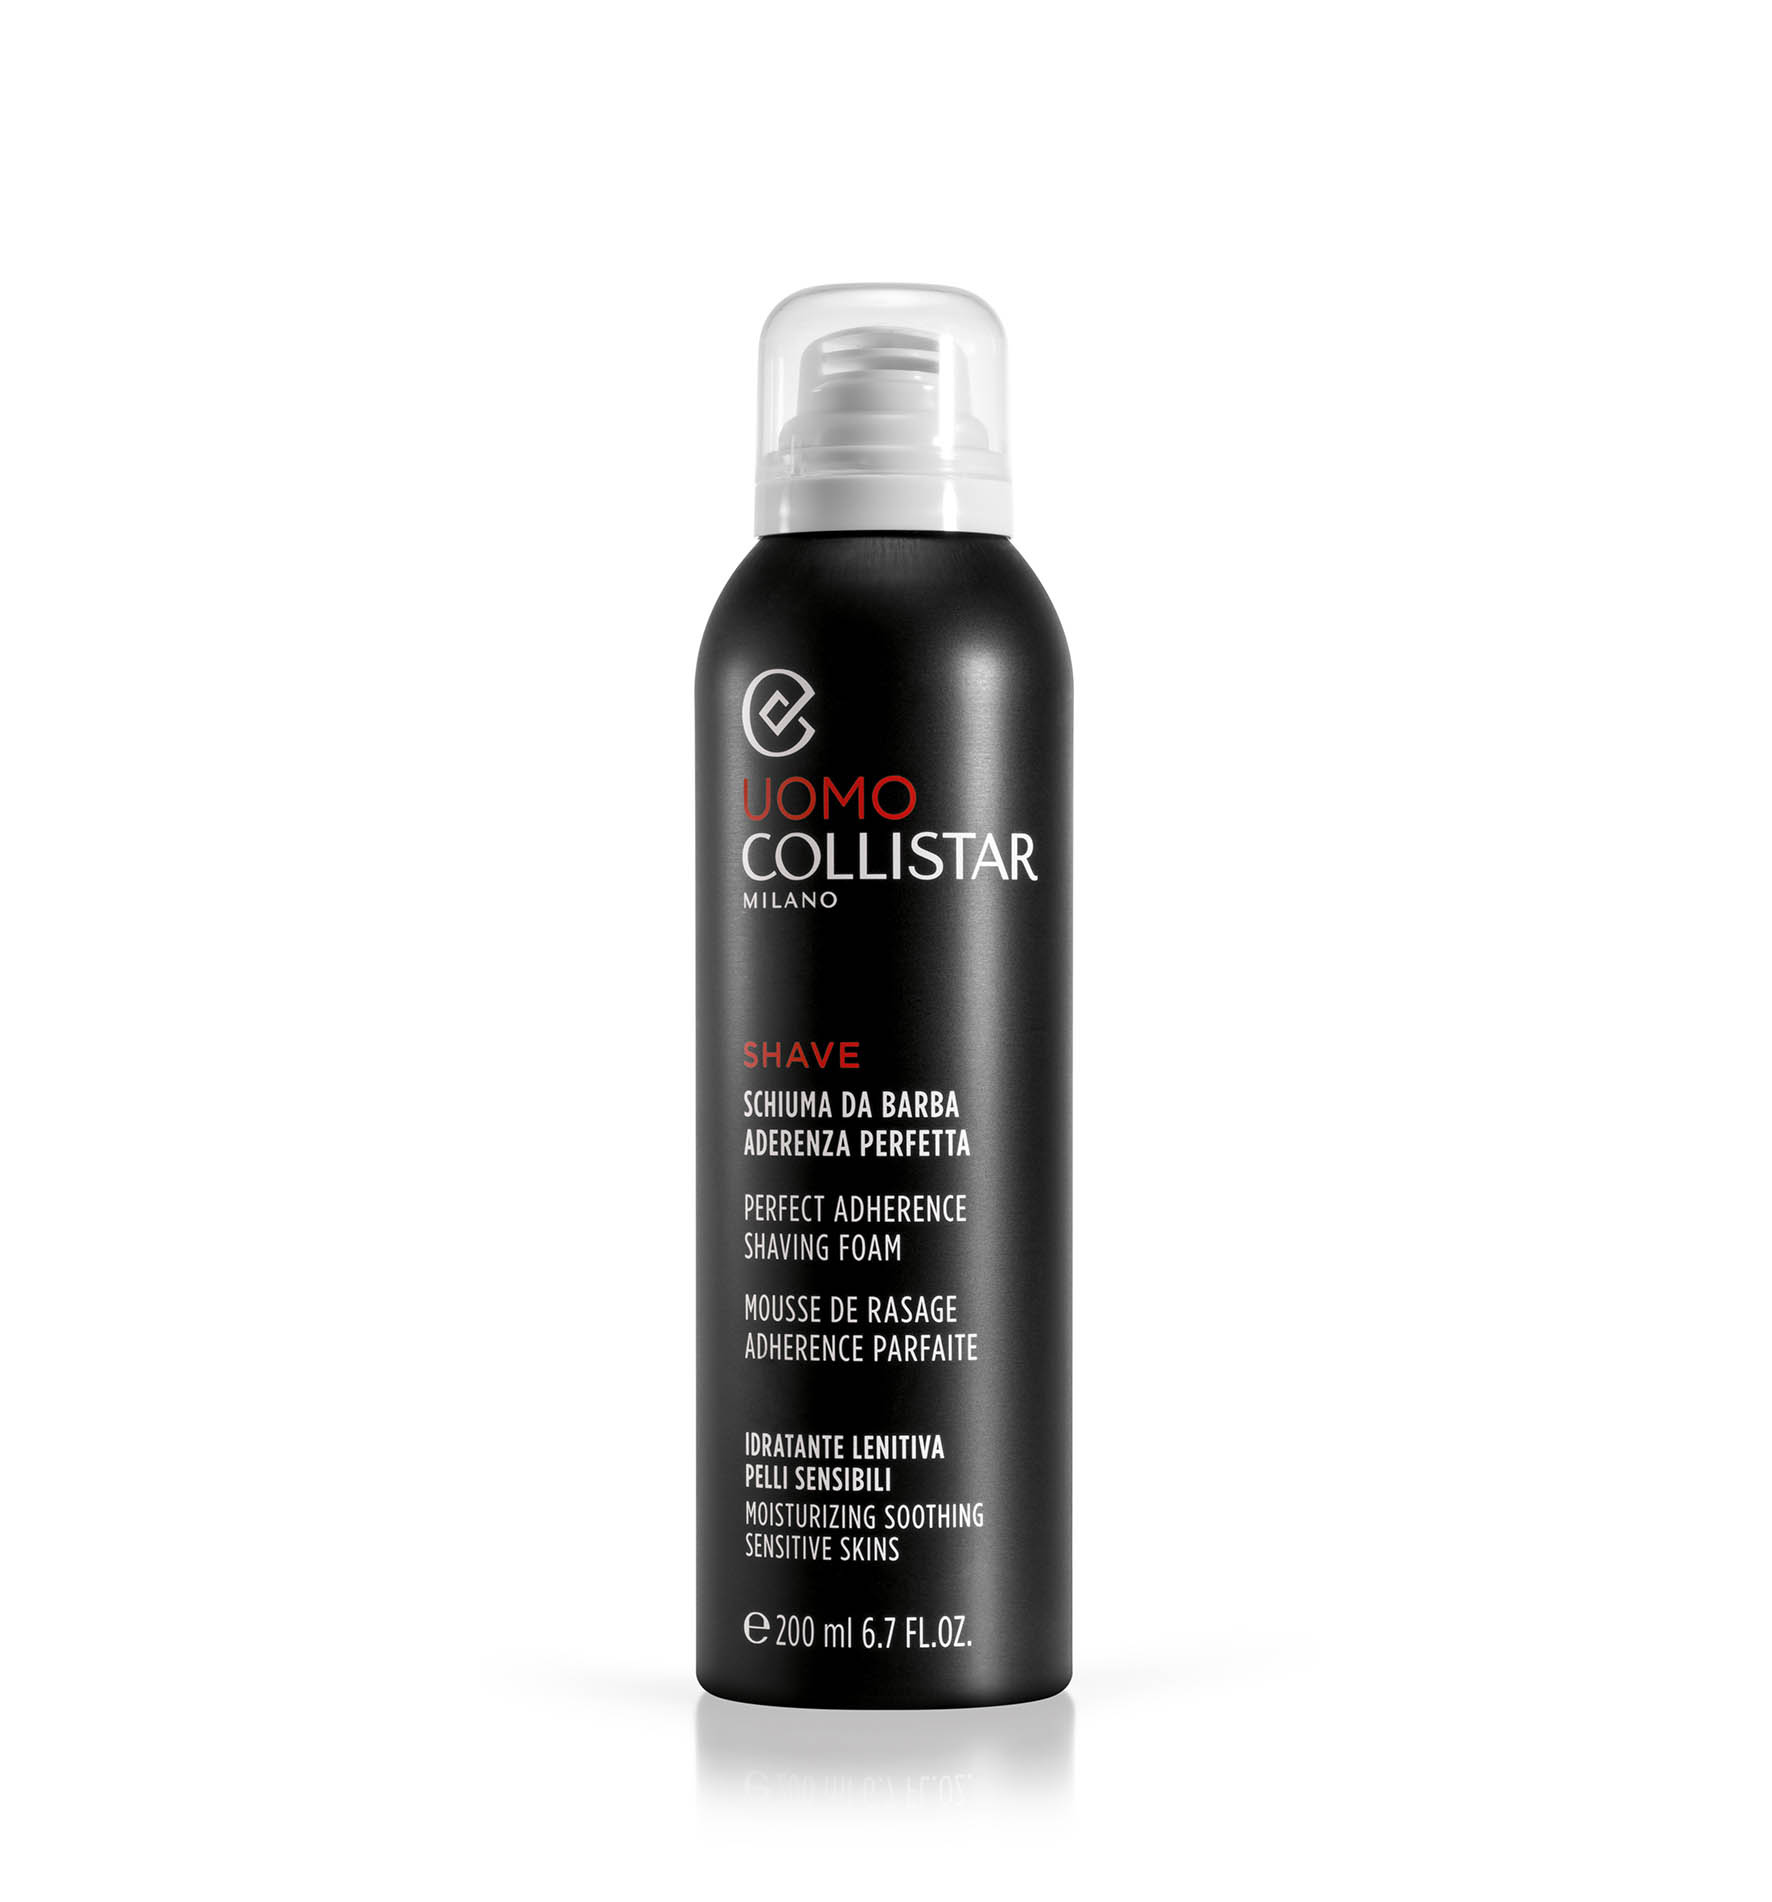 PERFECT ADHERENCE SHAVING FOAM MOISTURIZING SOOTHING SENSITIVE SKIN - Shaving and After shave | Collistar - Shop Online Ufficiale